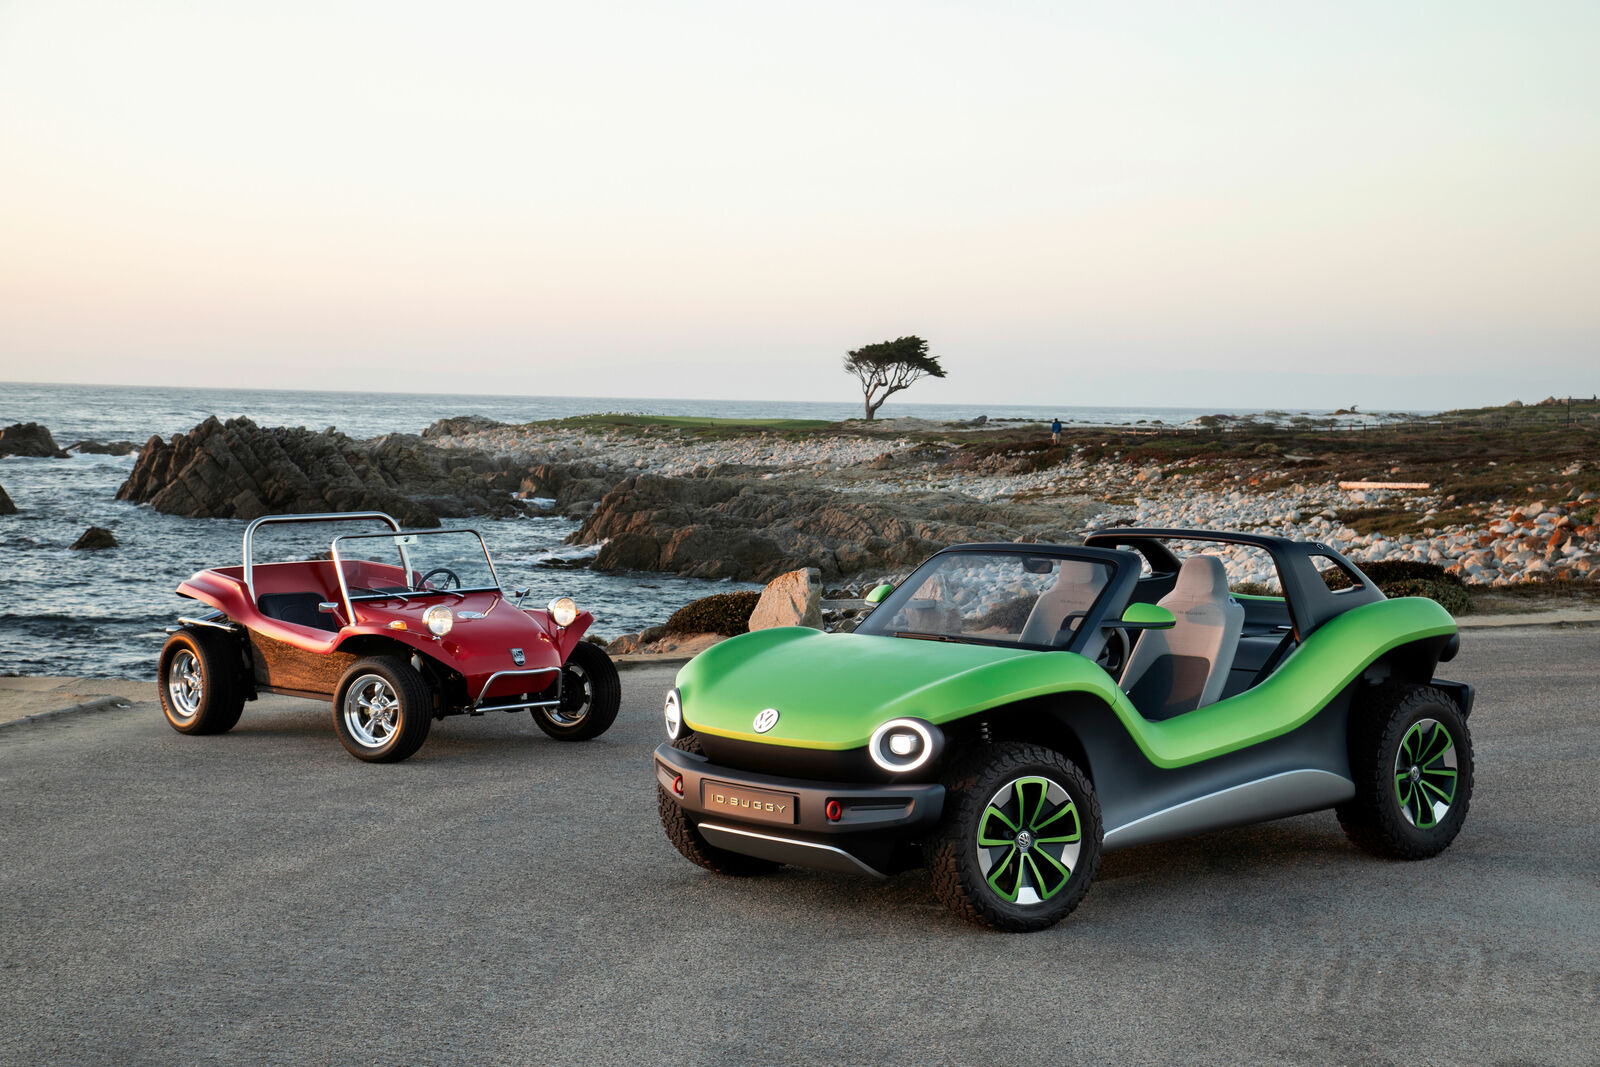 ID. BUGGY beim Pebble Beach Concours d’Elegance